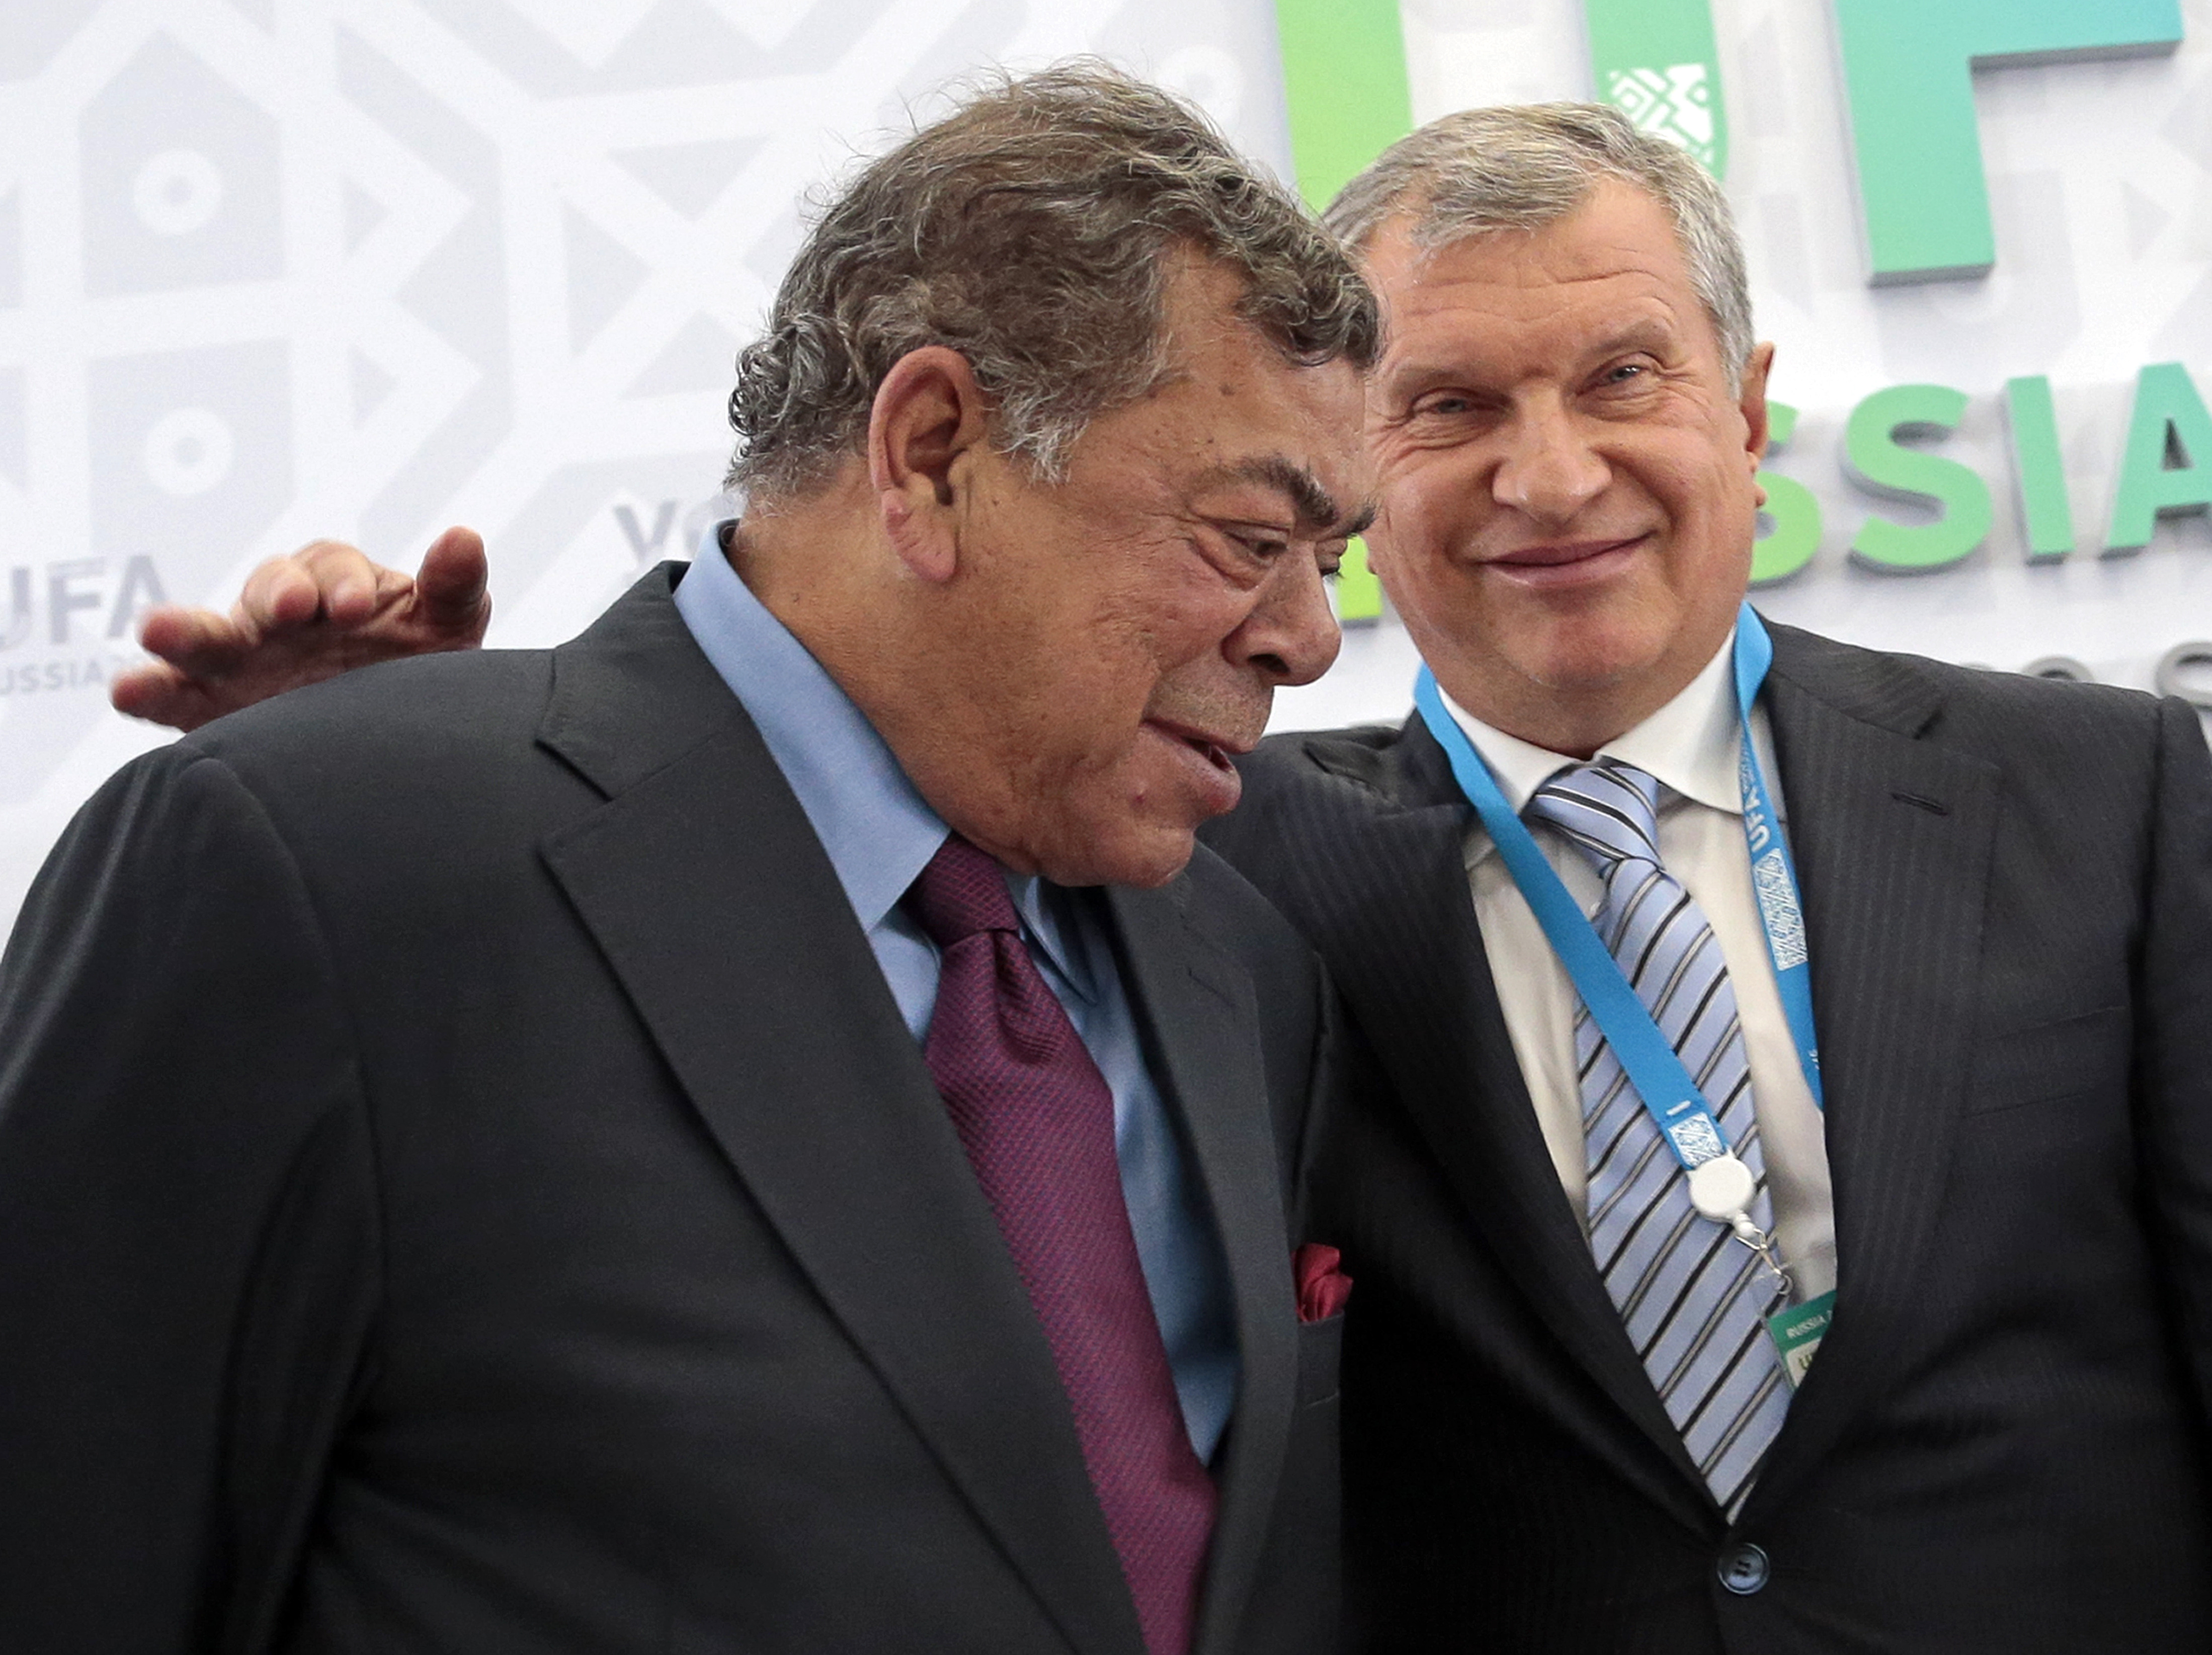 Shashi Ruia of India, chairman and co-founder of Essar Group, left, and Igor Sechin Rosneft CEO.